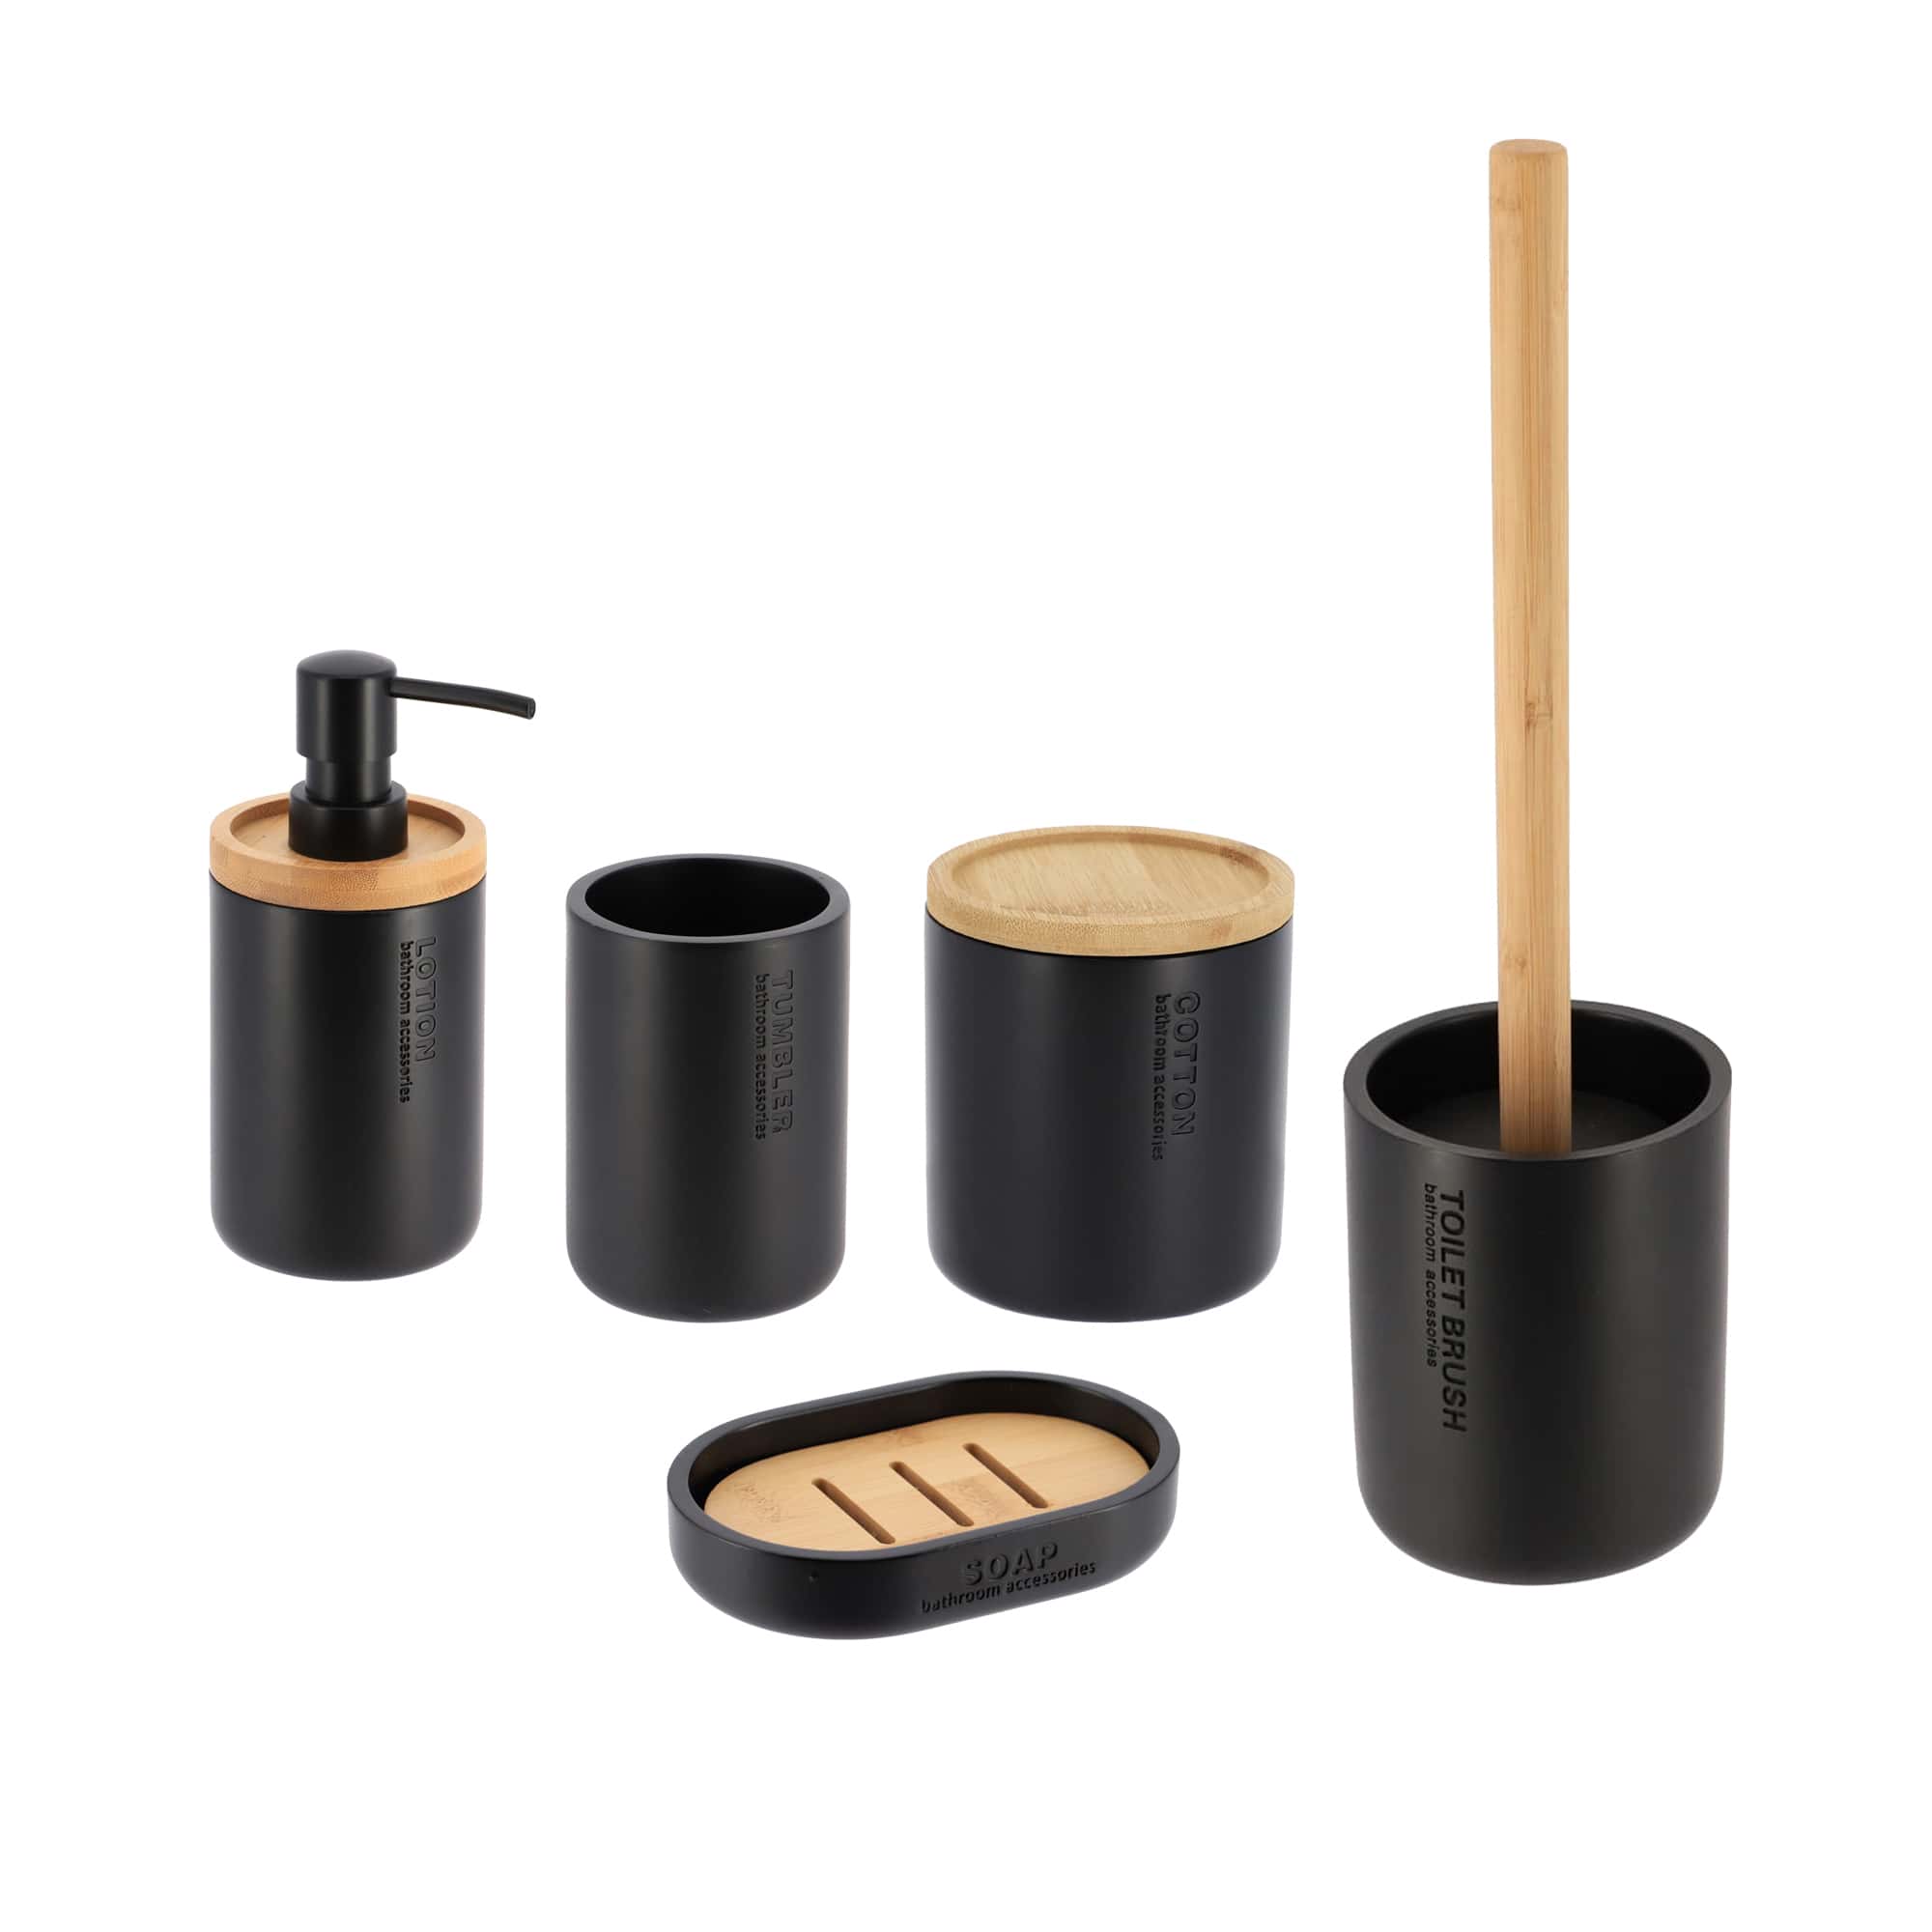 Modern Black Bathroom Accessories Set with Bamboo Details 5 pieces Liquid Soap Dispenser, Tumbler, Cotton Holder, Toilet Bowl Brush and Bar Soap Holder